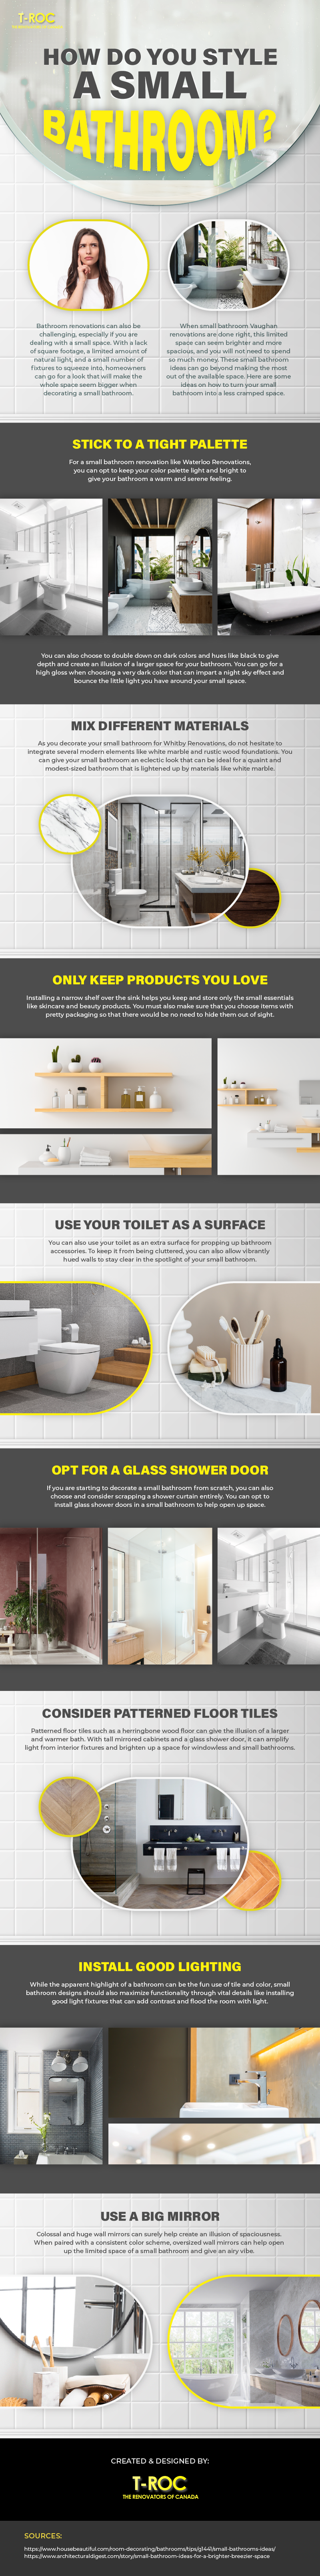 How Do You Style a Small Bathroom? [Infographic]